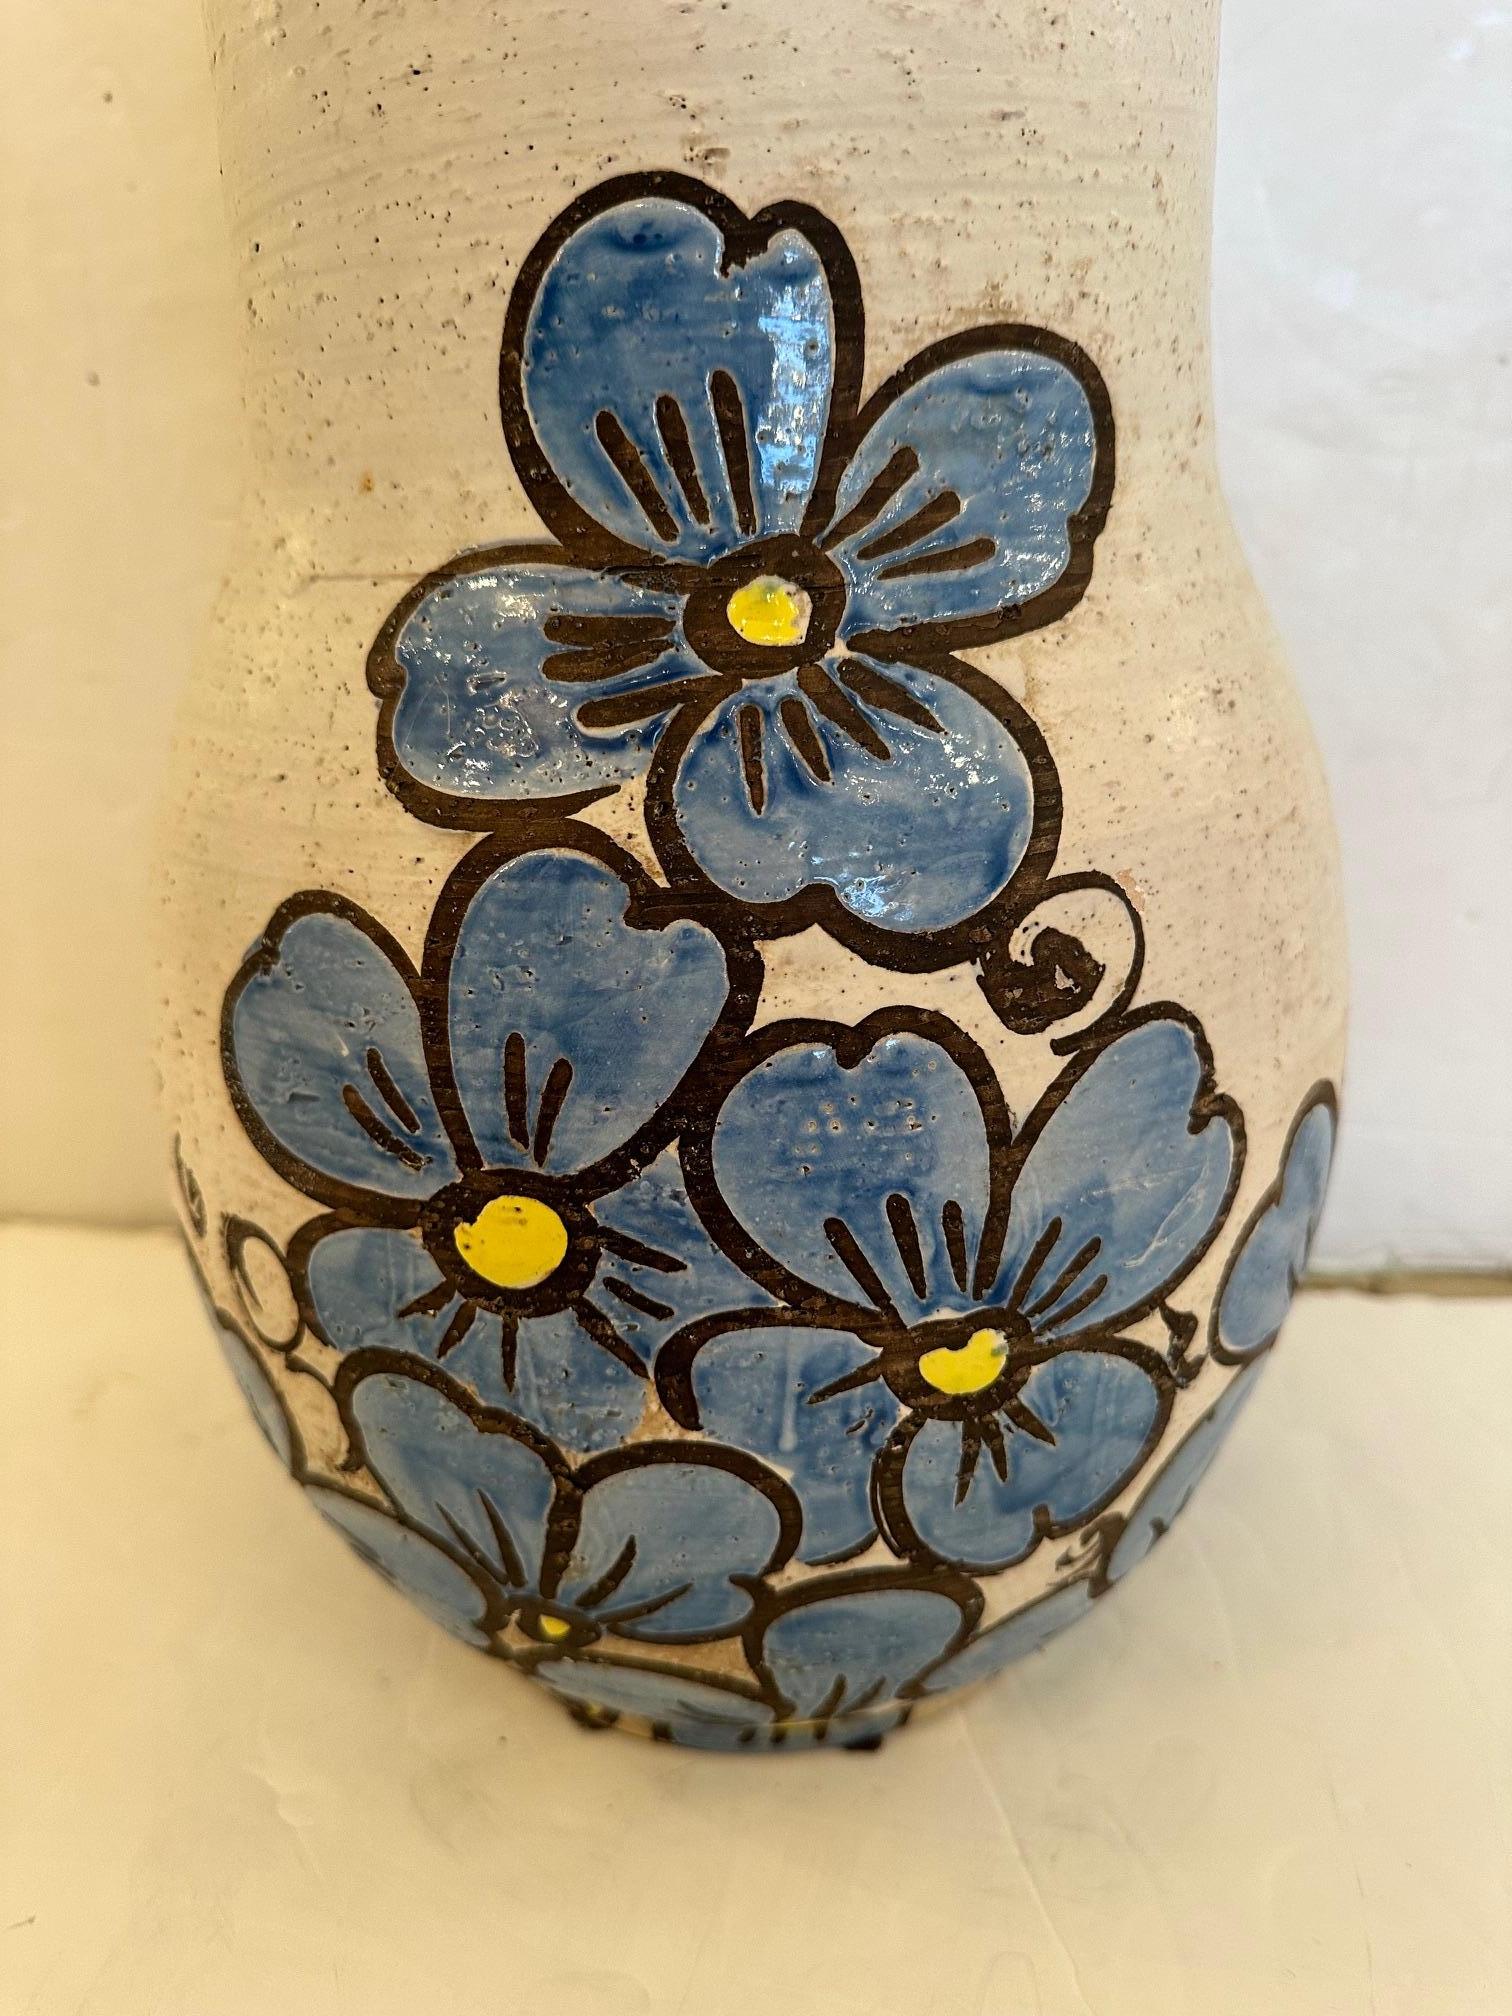 Fetching Large Painted Italian Ceramic Vase or Umbrella Cane Holder In Good Condition For Sale In Hopewell, NJ